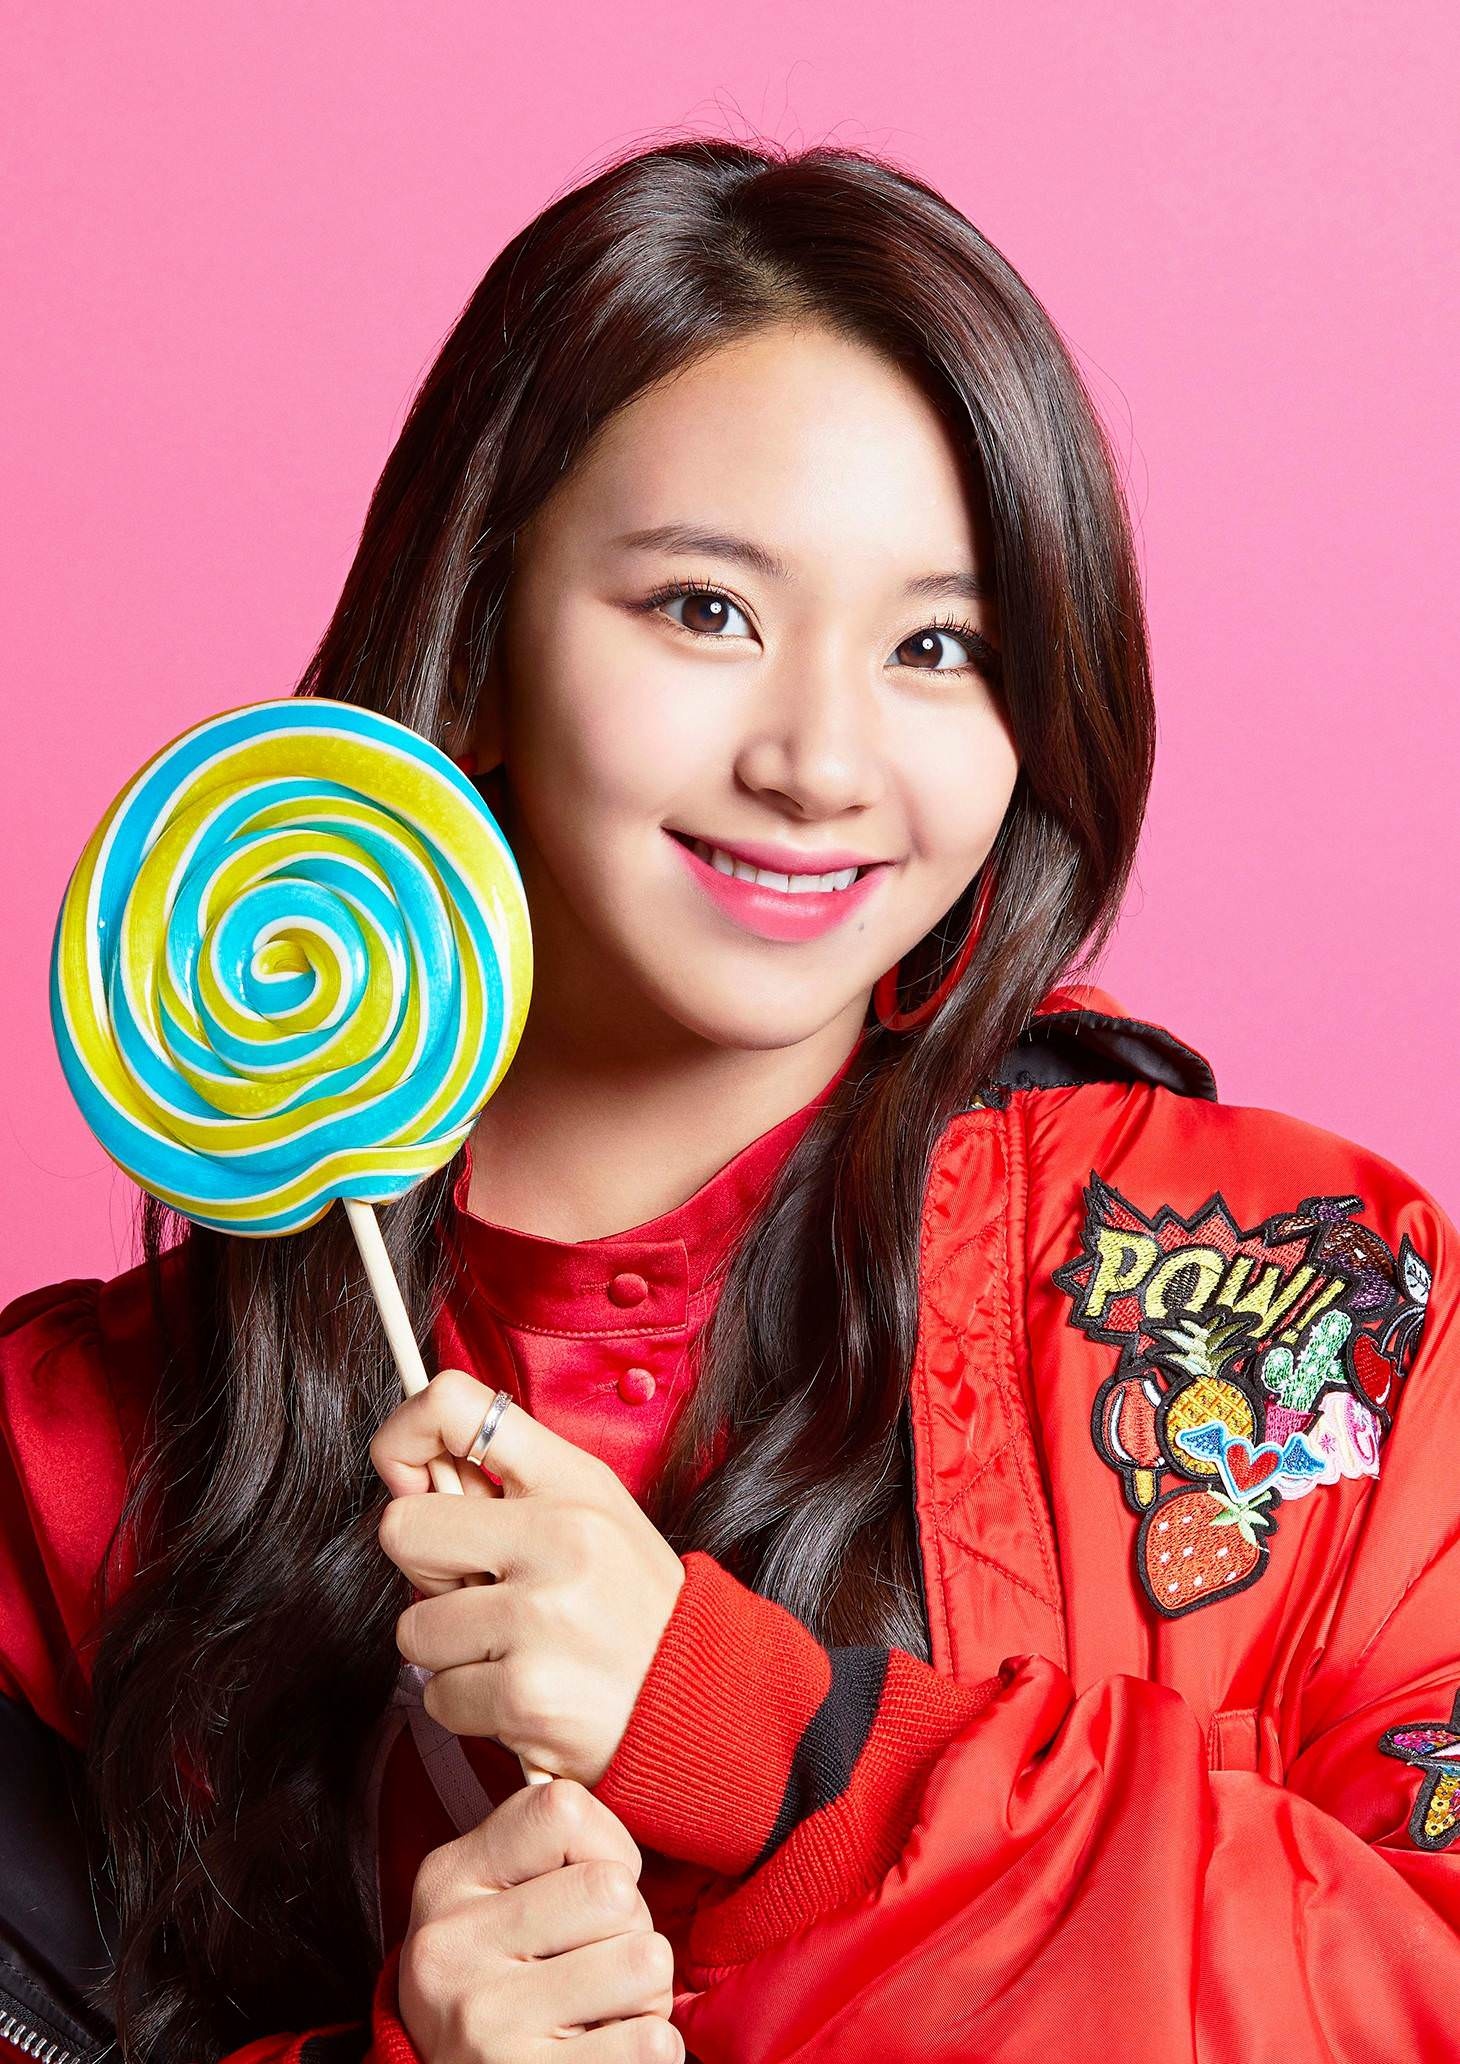 Chaeyoung, Candy pop, Korean photoshoots, Chaeyoung, 1460x2070 HD Handy